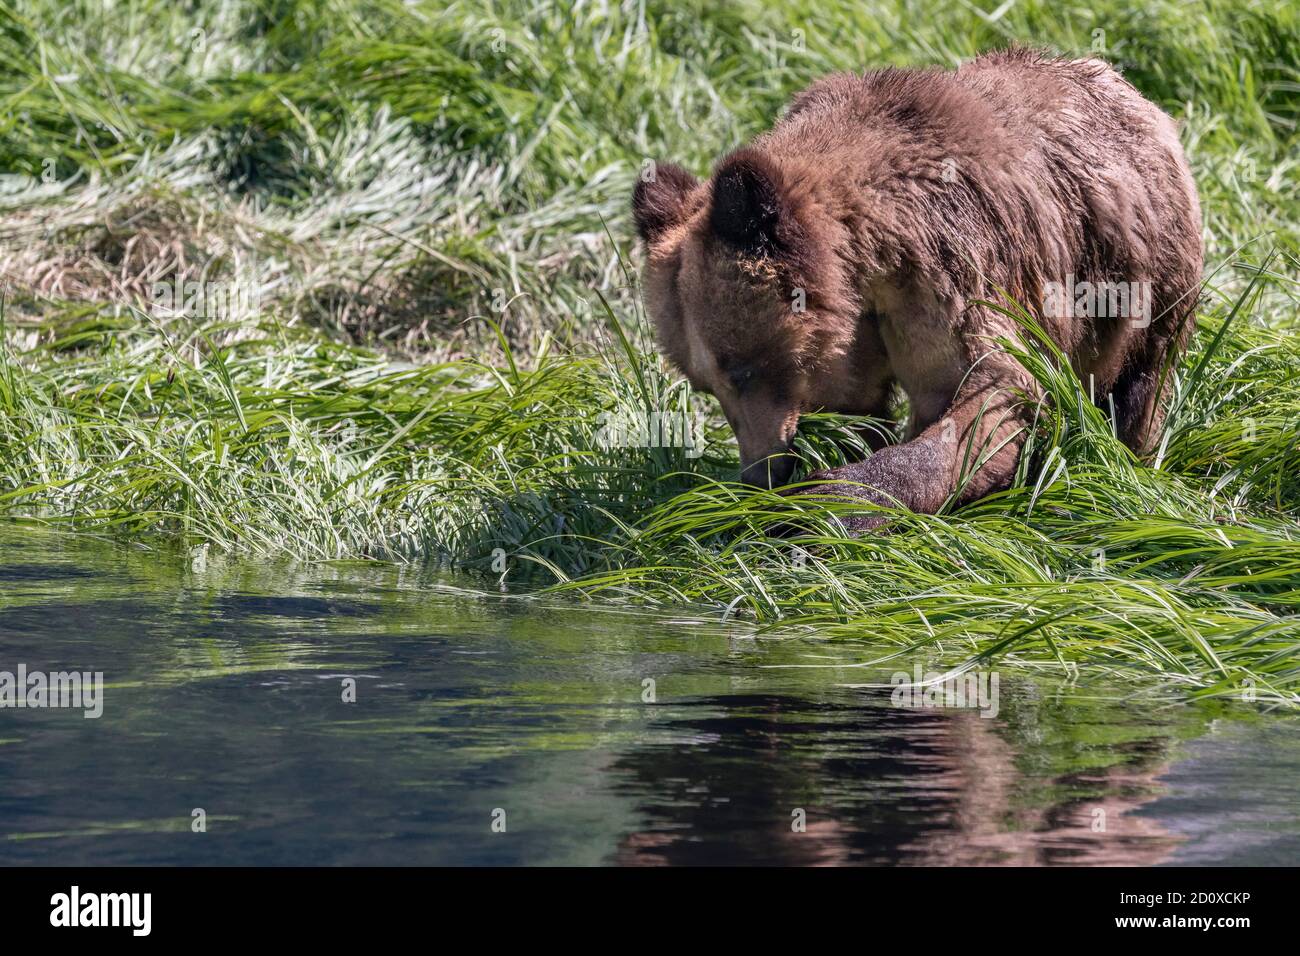 Young grizzly bear shoving sedge grass into its mouth by the water, Khutzeymateen, BC Stock Photo